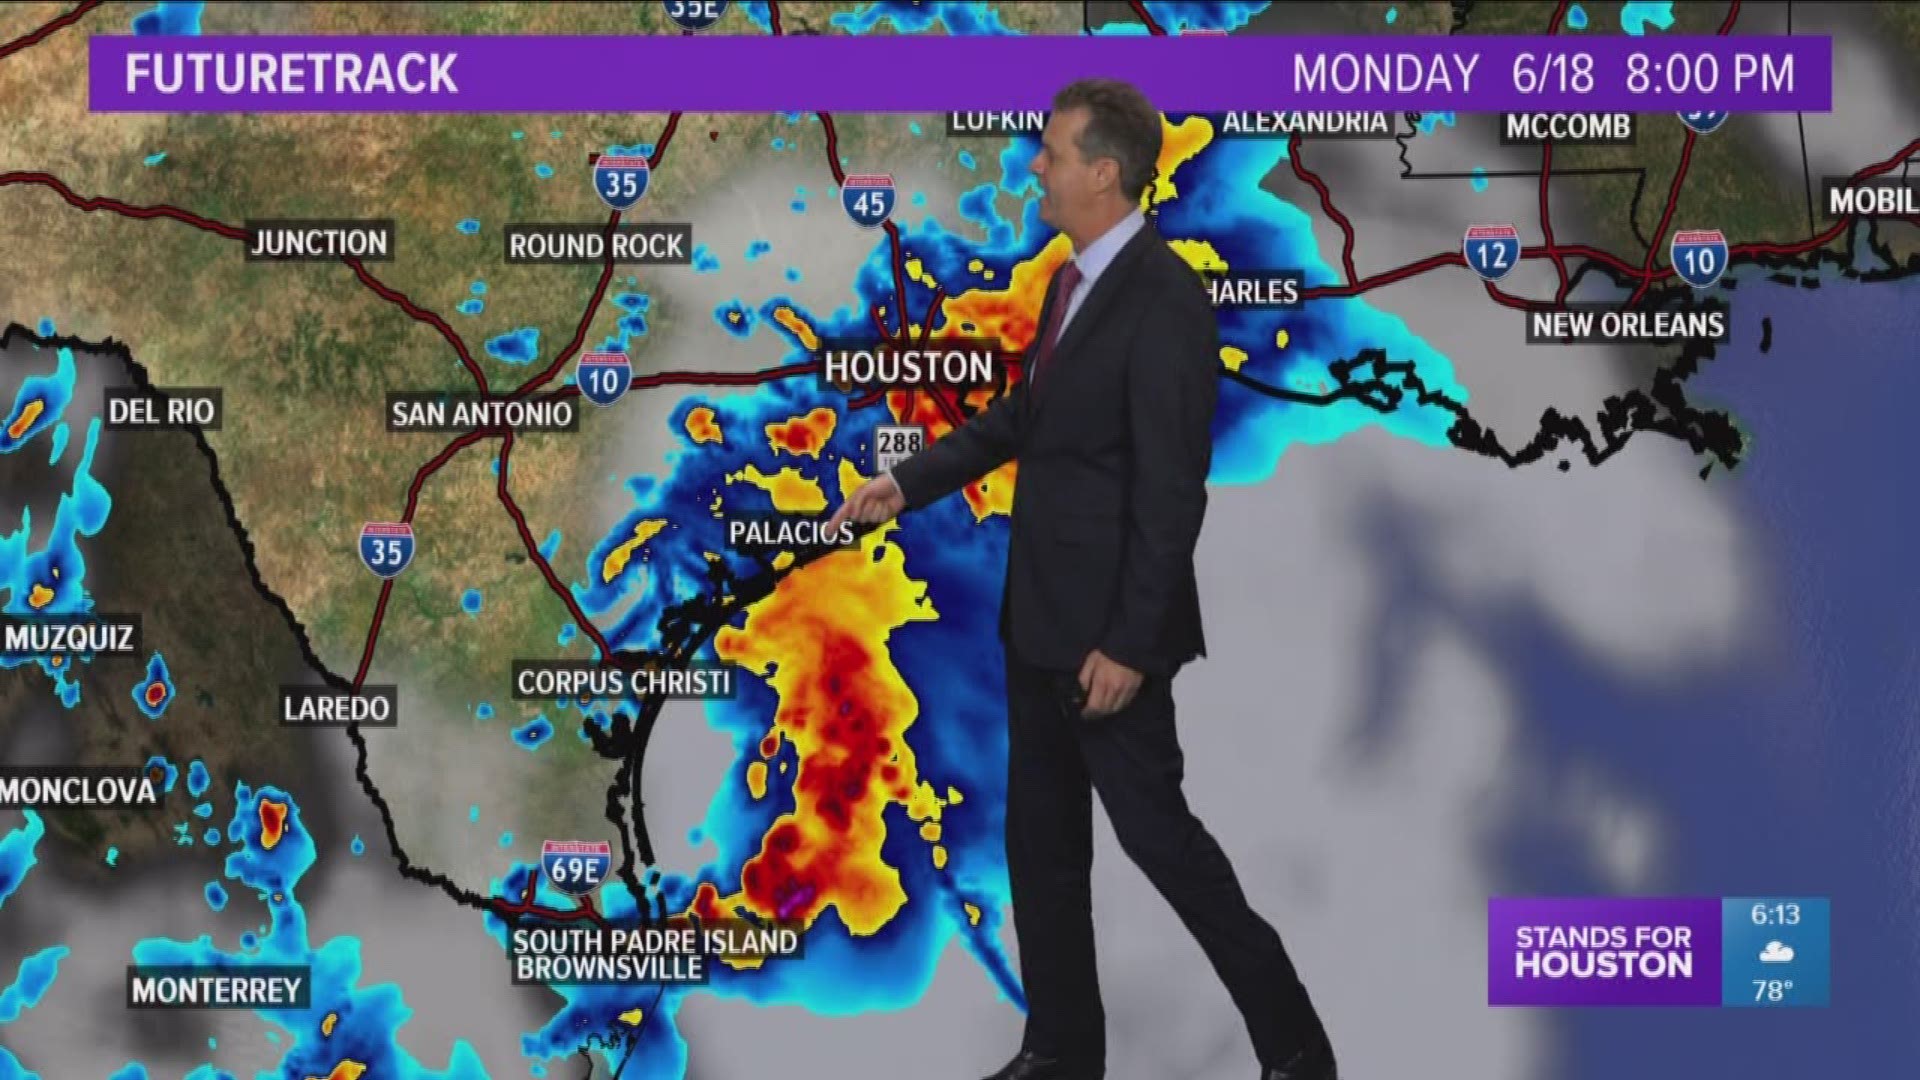 Our flooding threat is increasing for Monday night, according to Chief Meteorologist David Paul.